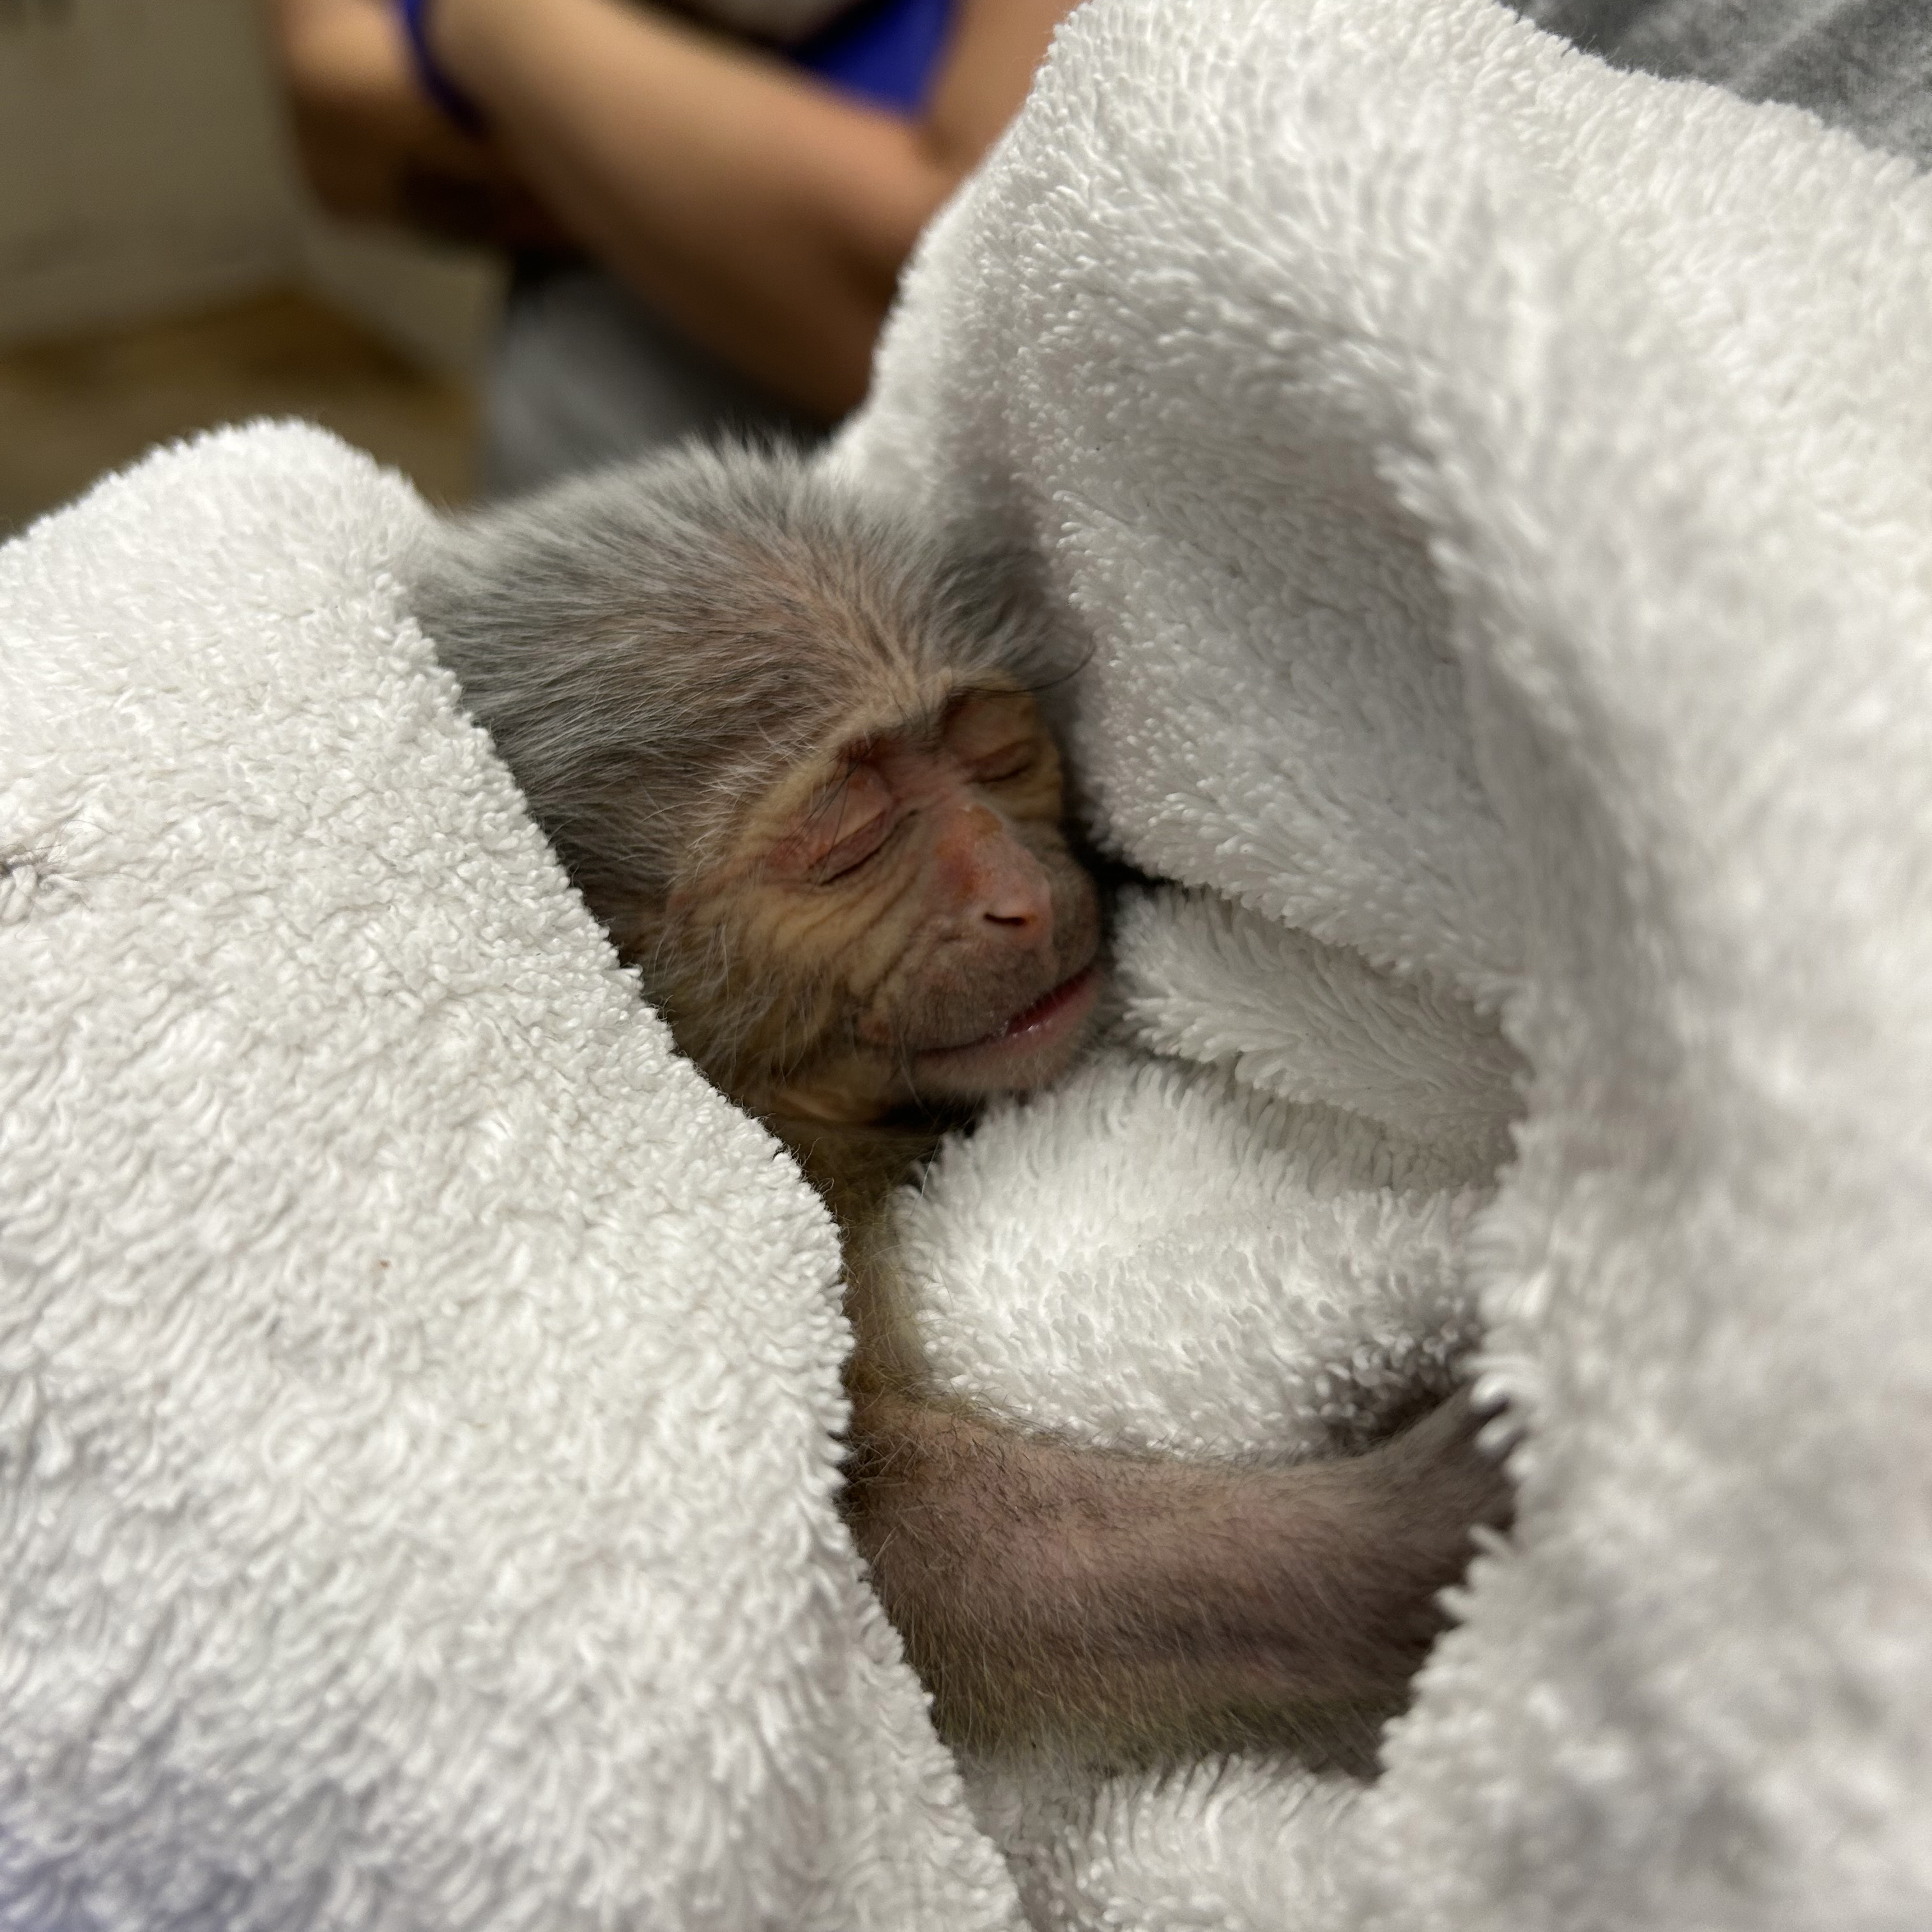 An hours-old baby swamp monkey, swaddled in white cloth.